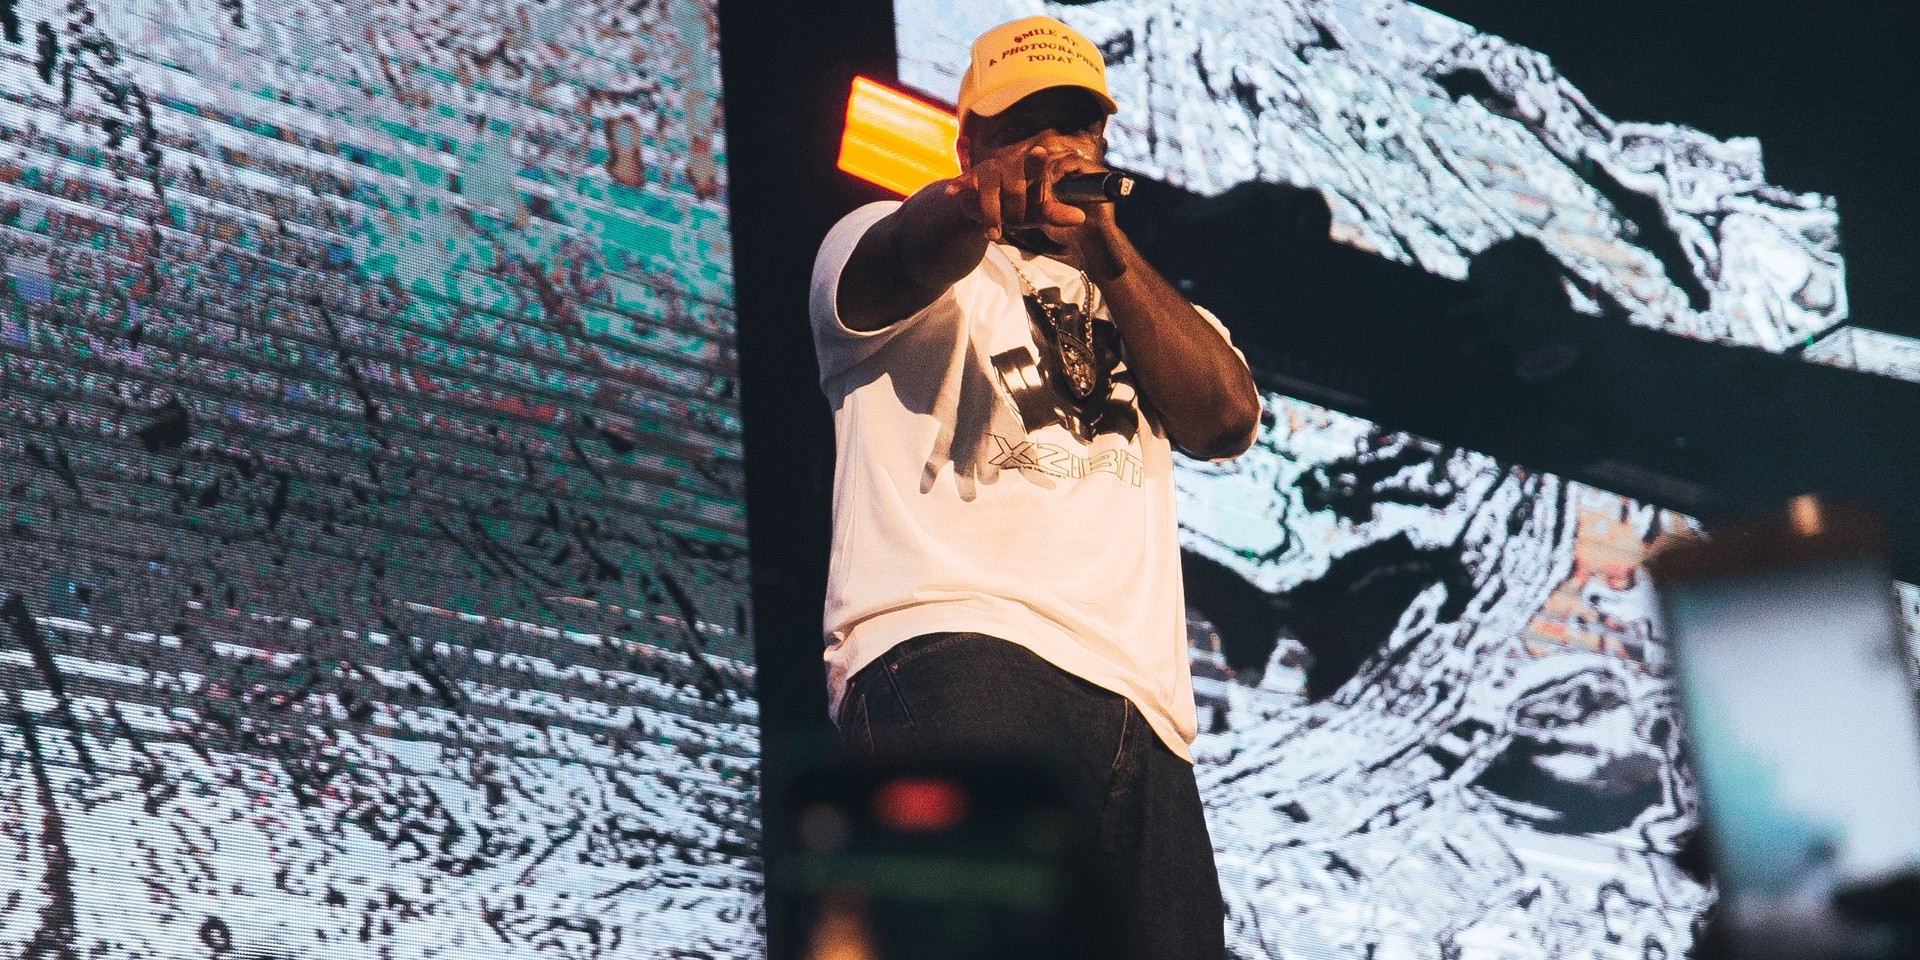 A$AP Ferg in Manila debut: ‘I made a new family tonight’ – photo gallery